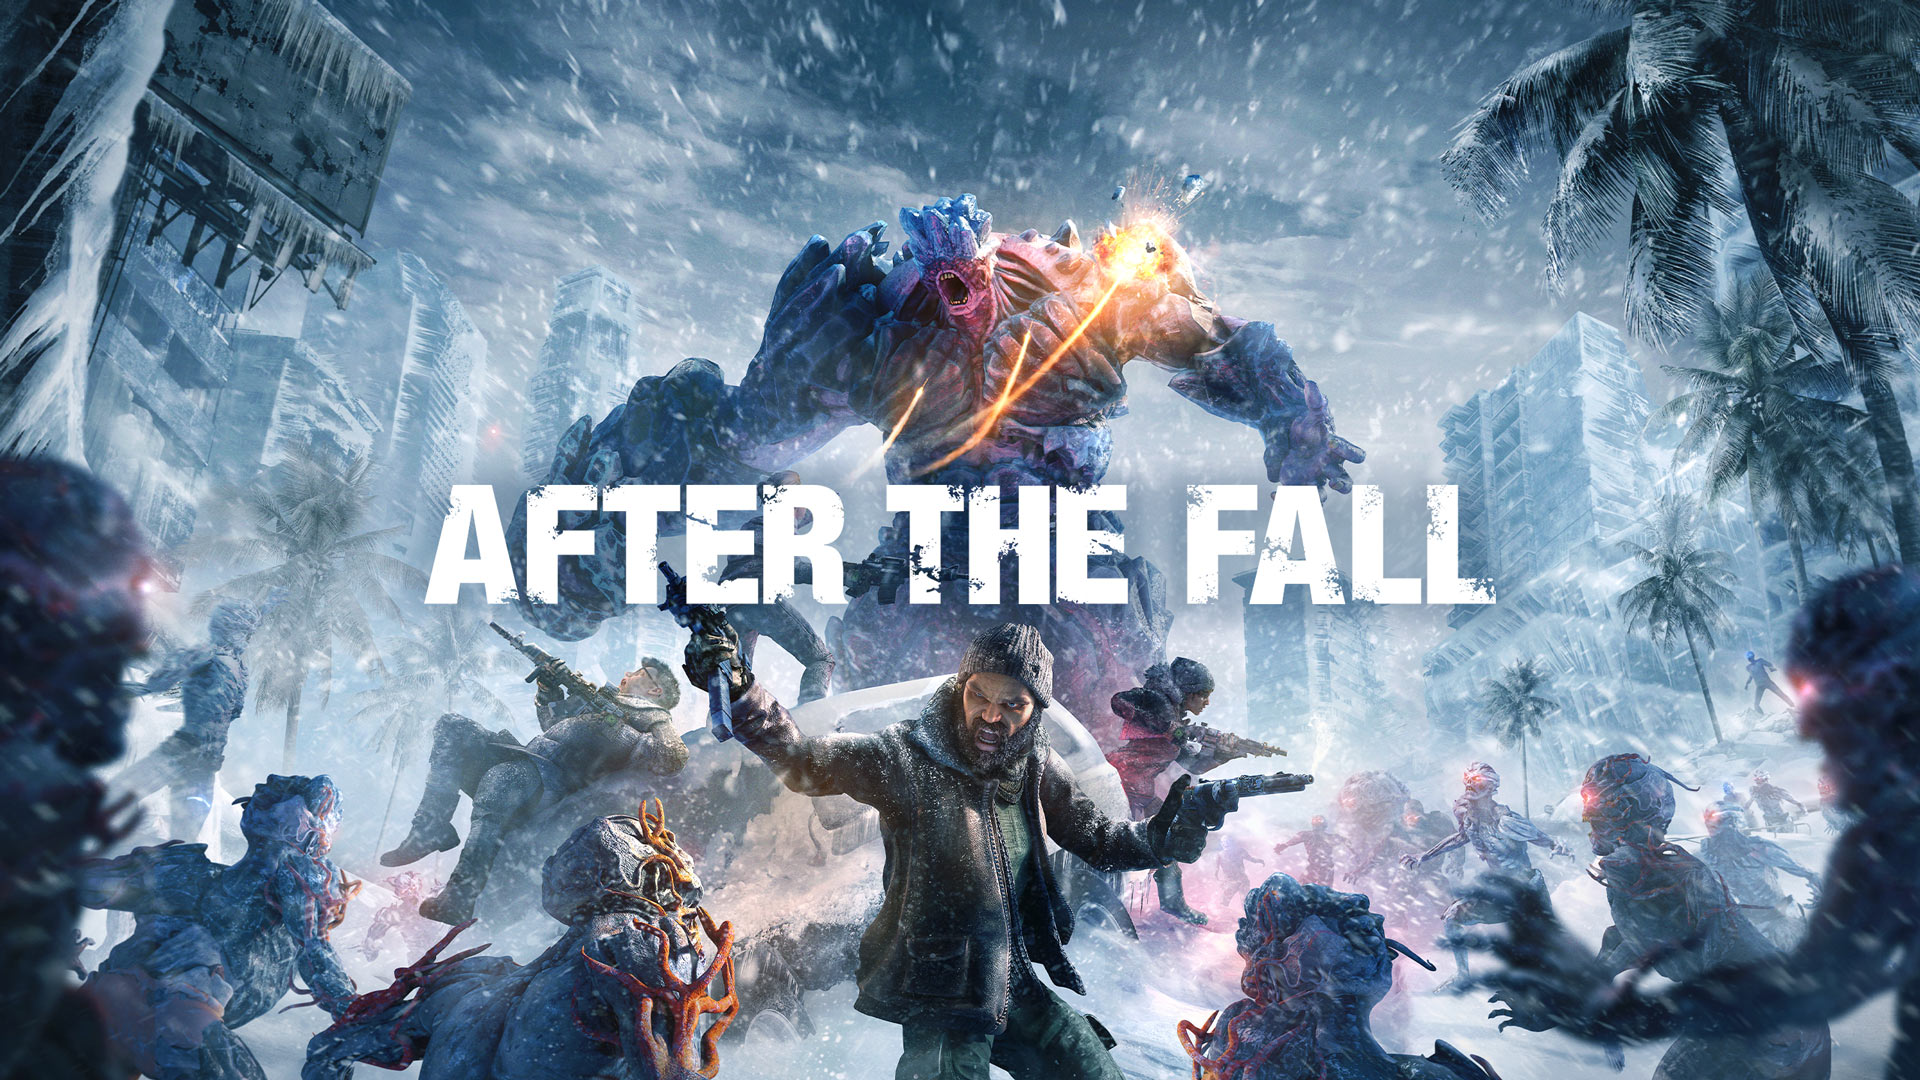 After the fall vr. After the Fall. Игры на ps4. Новая игра.